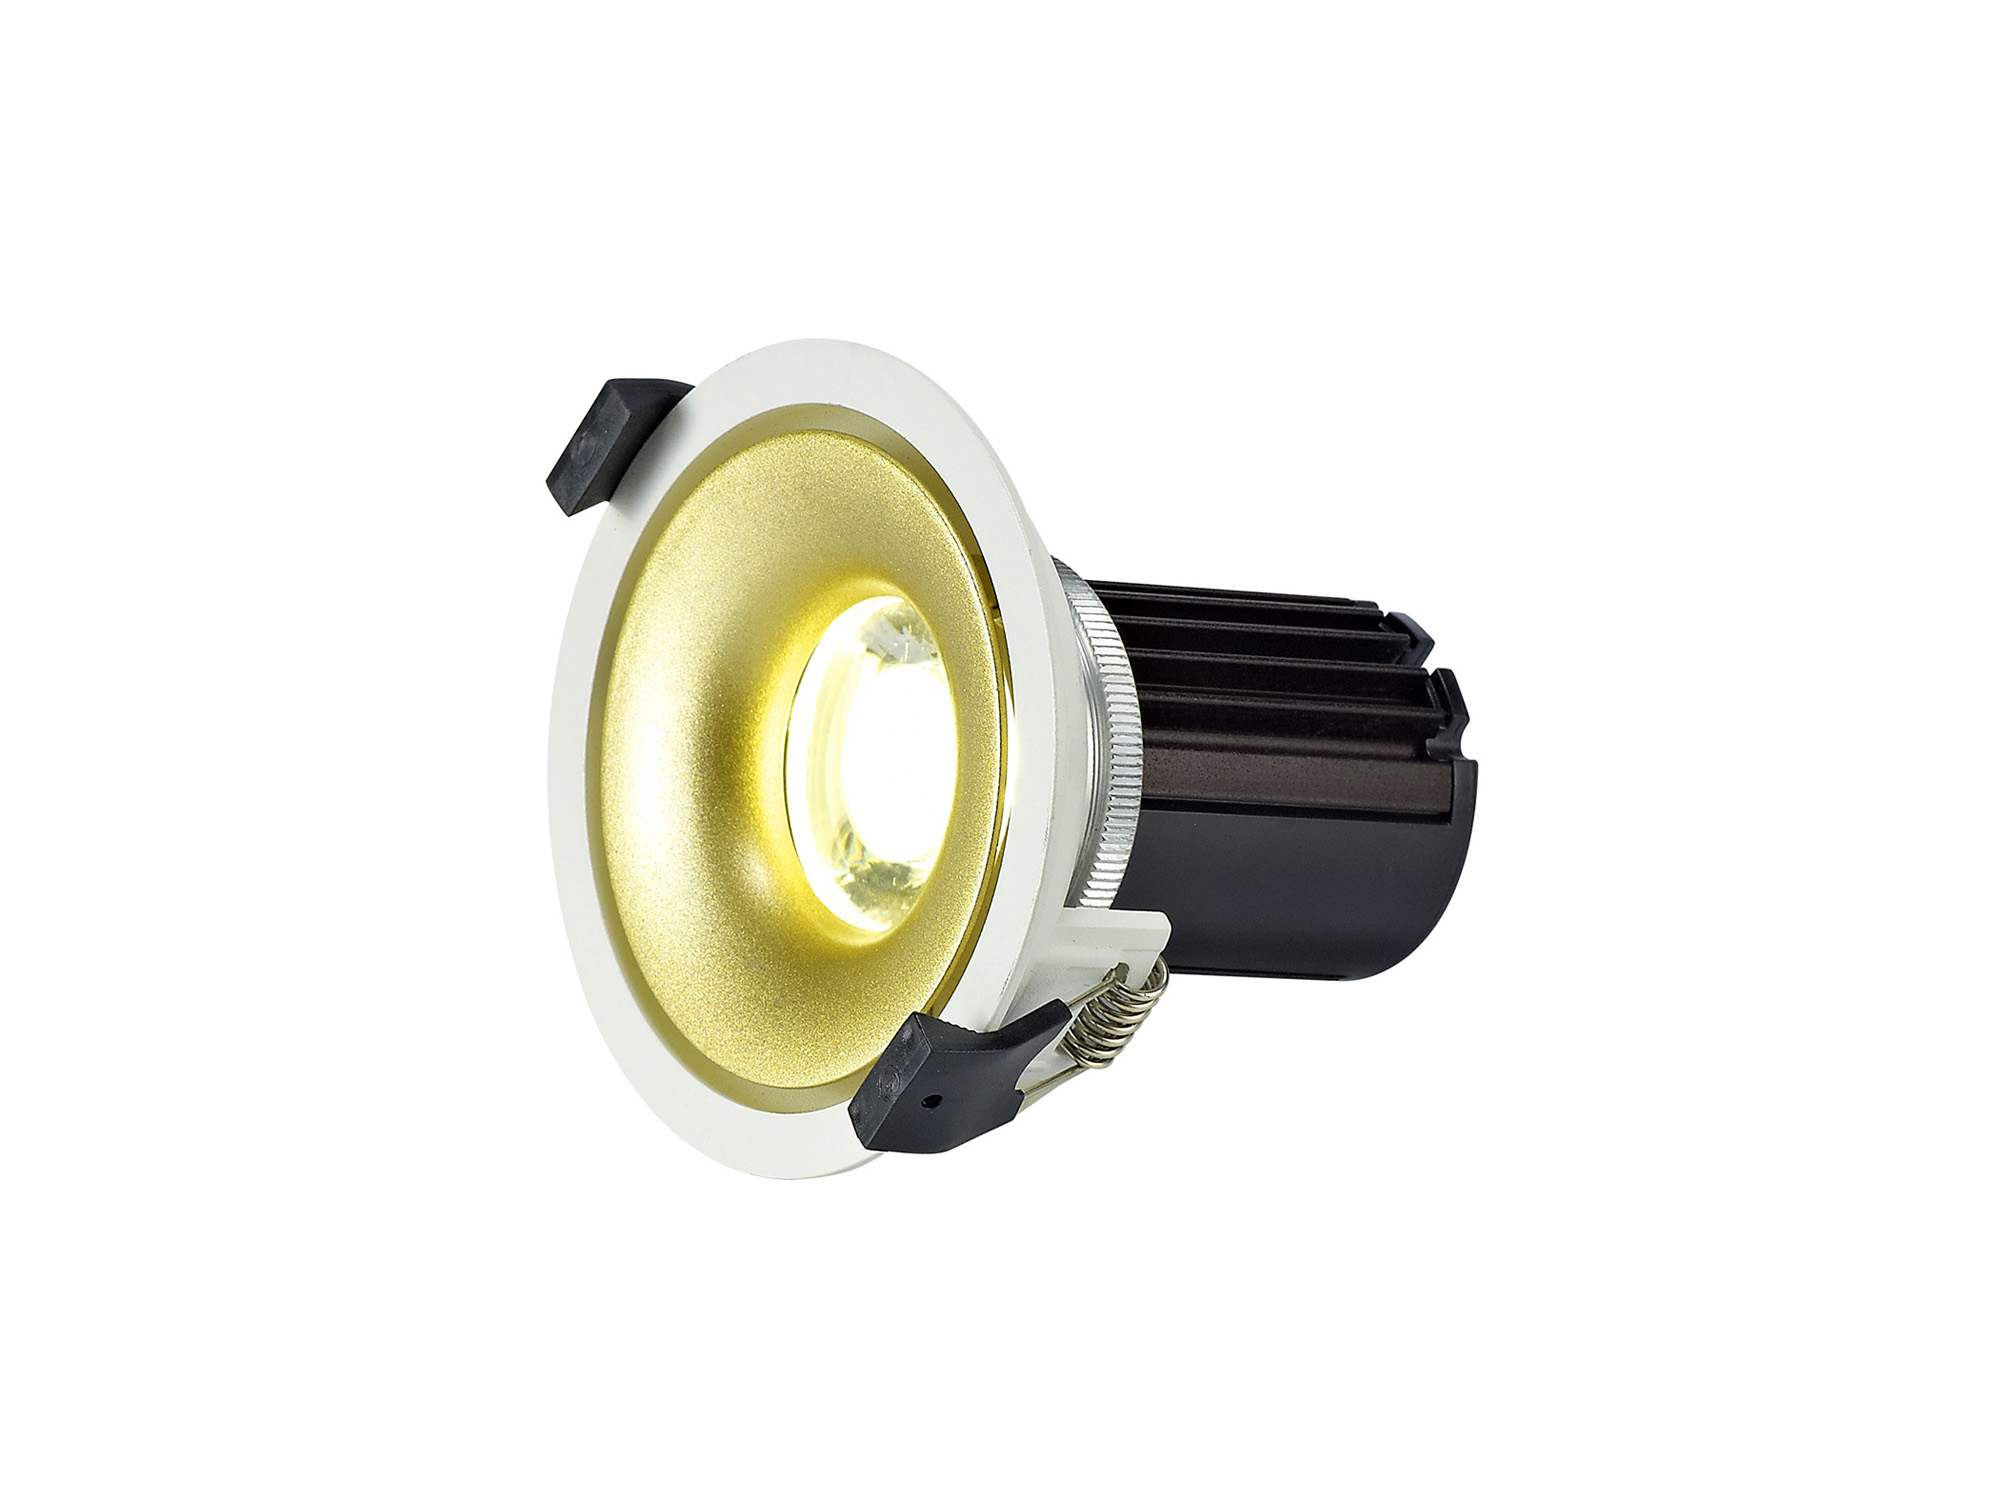 DM201033  Bolor 10 Tridonic Powered 10W 4000K 810lm 36° CRI>90 LED Engine White/Gold Fixed Recessed Spotlight; IP20